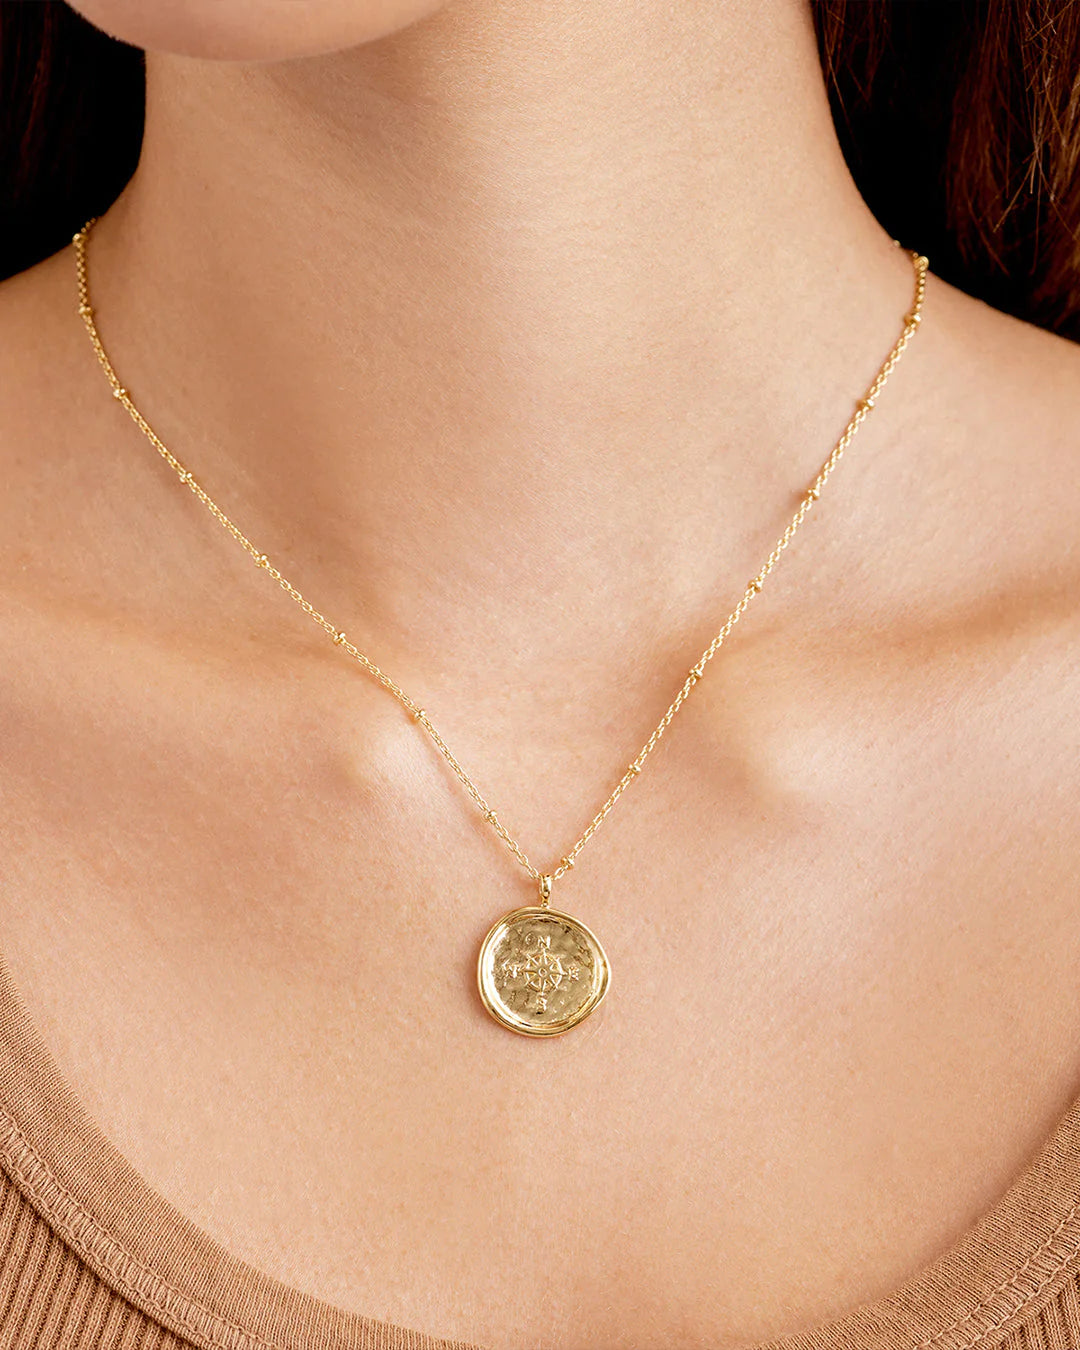 "Compass Coin" Necklace by Gorjana